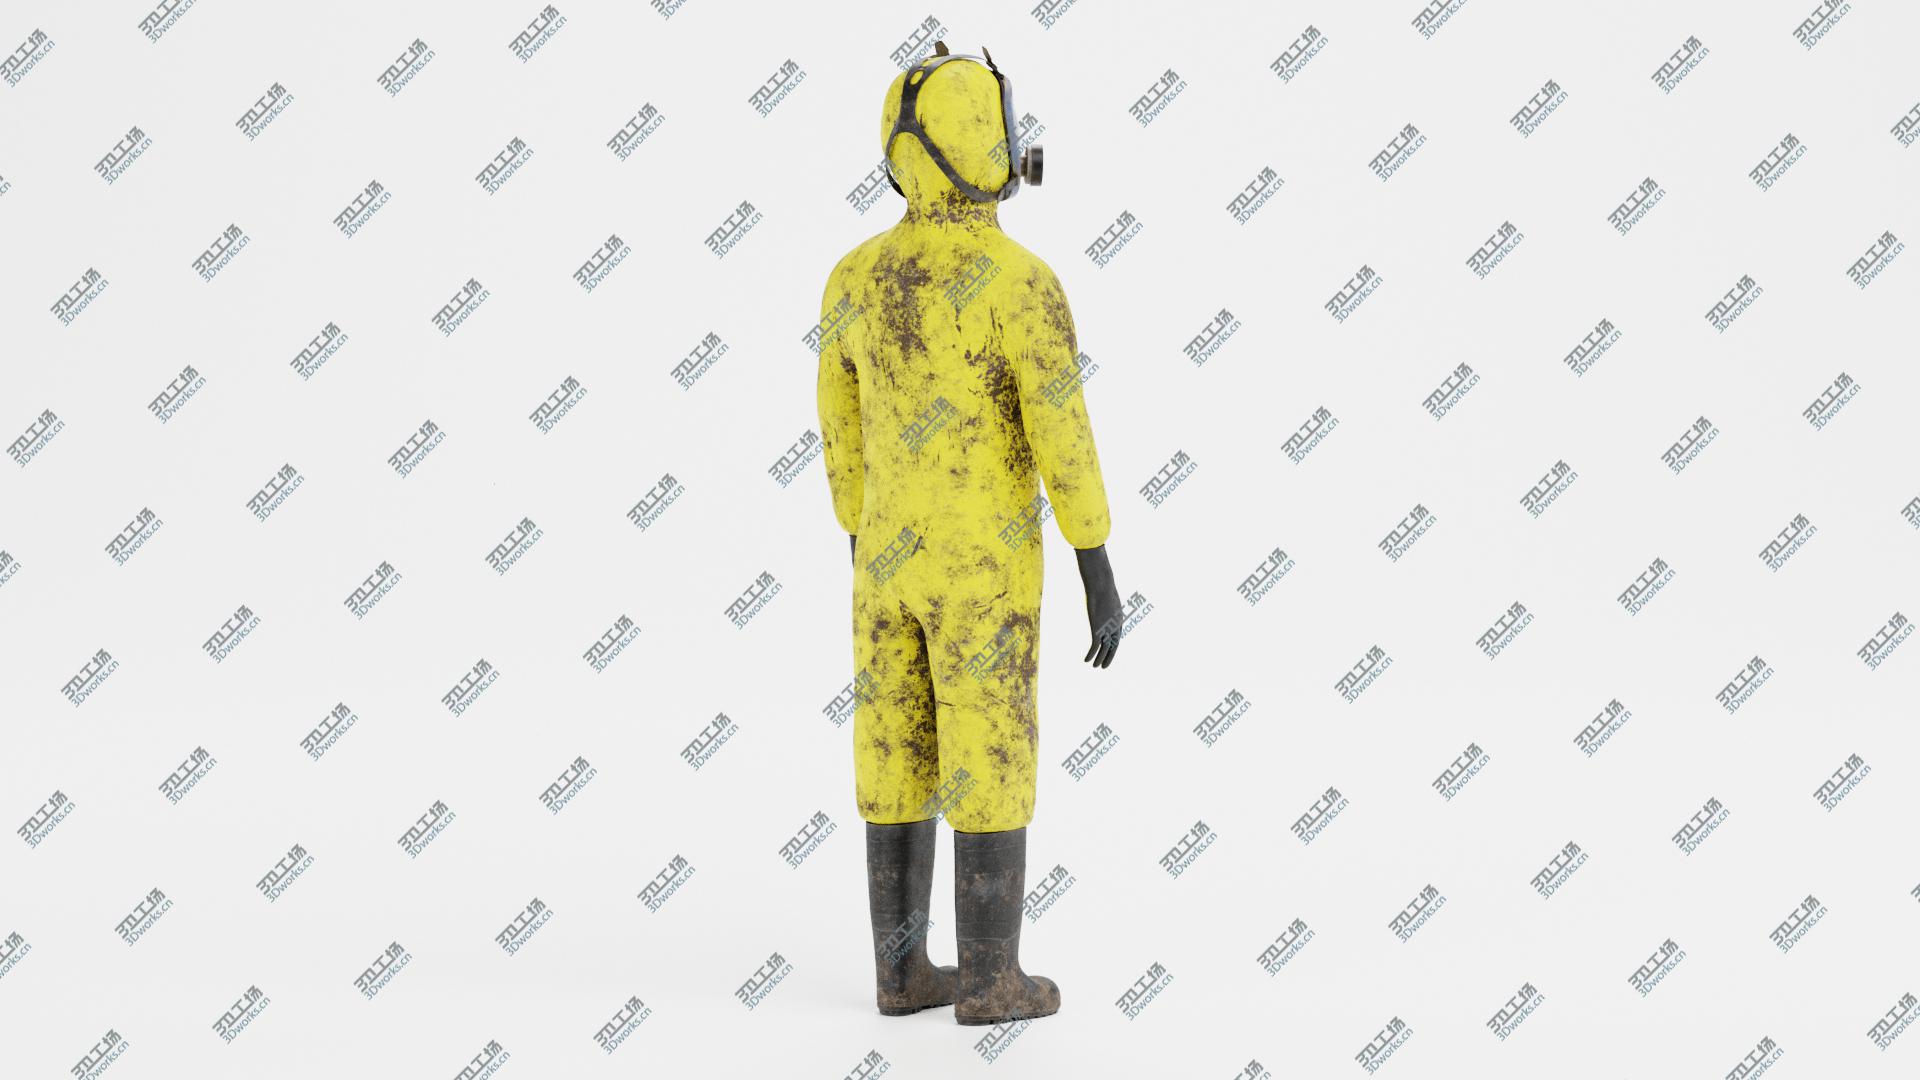 images/goods_img/202104093/3D Protective Suit 2 model/5.jpg